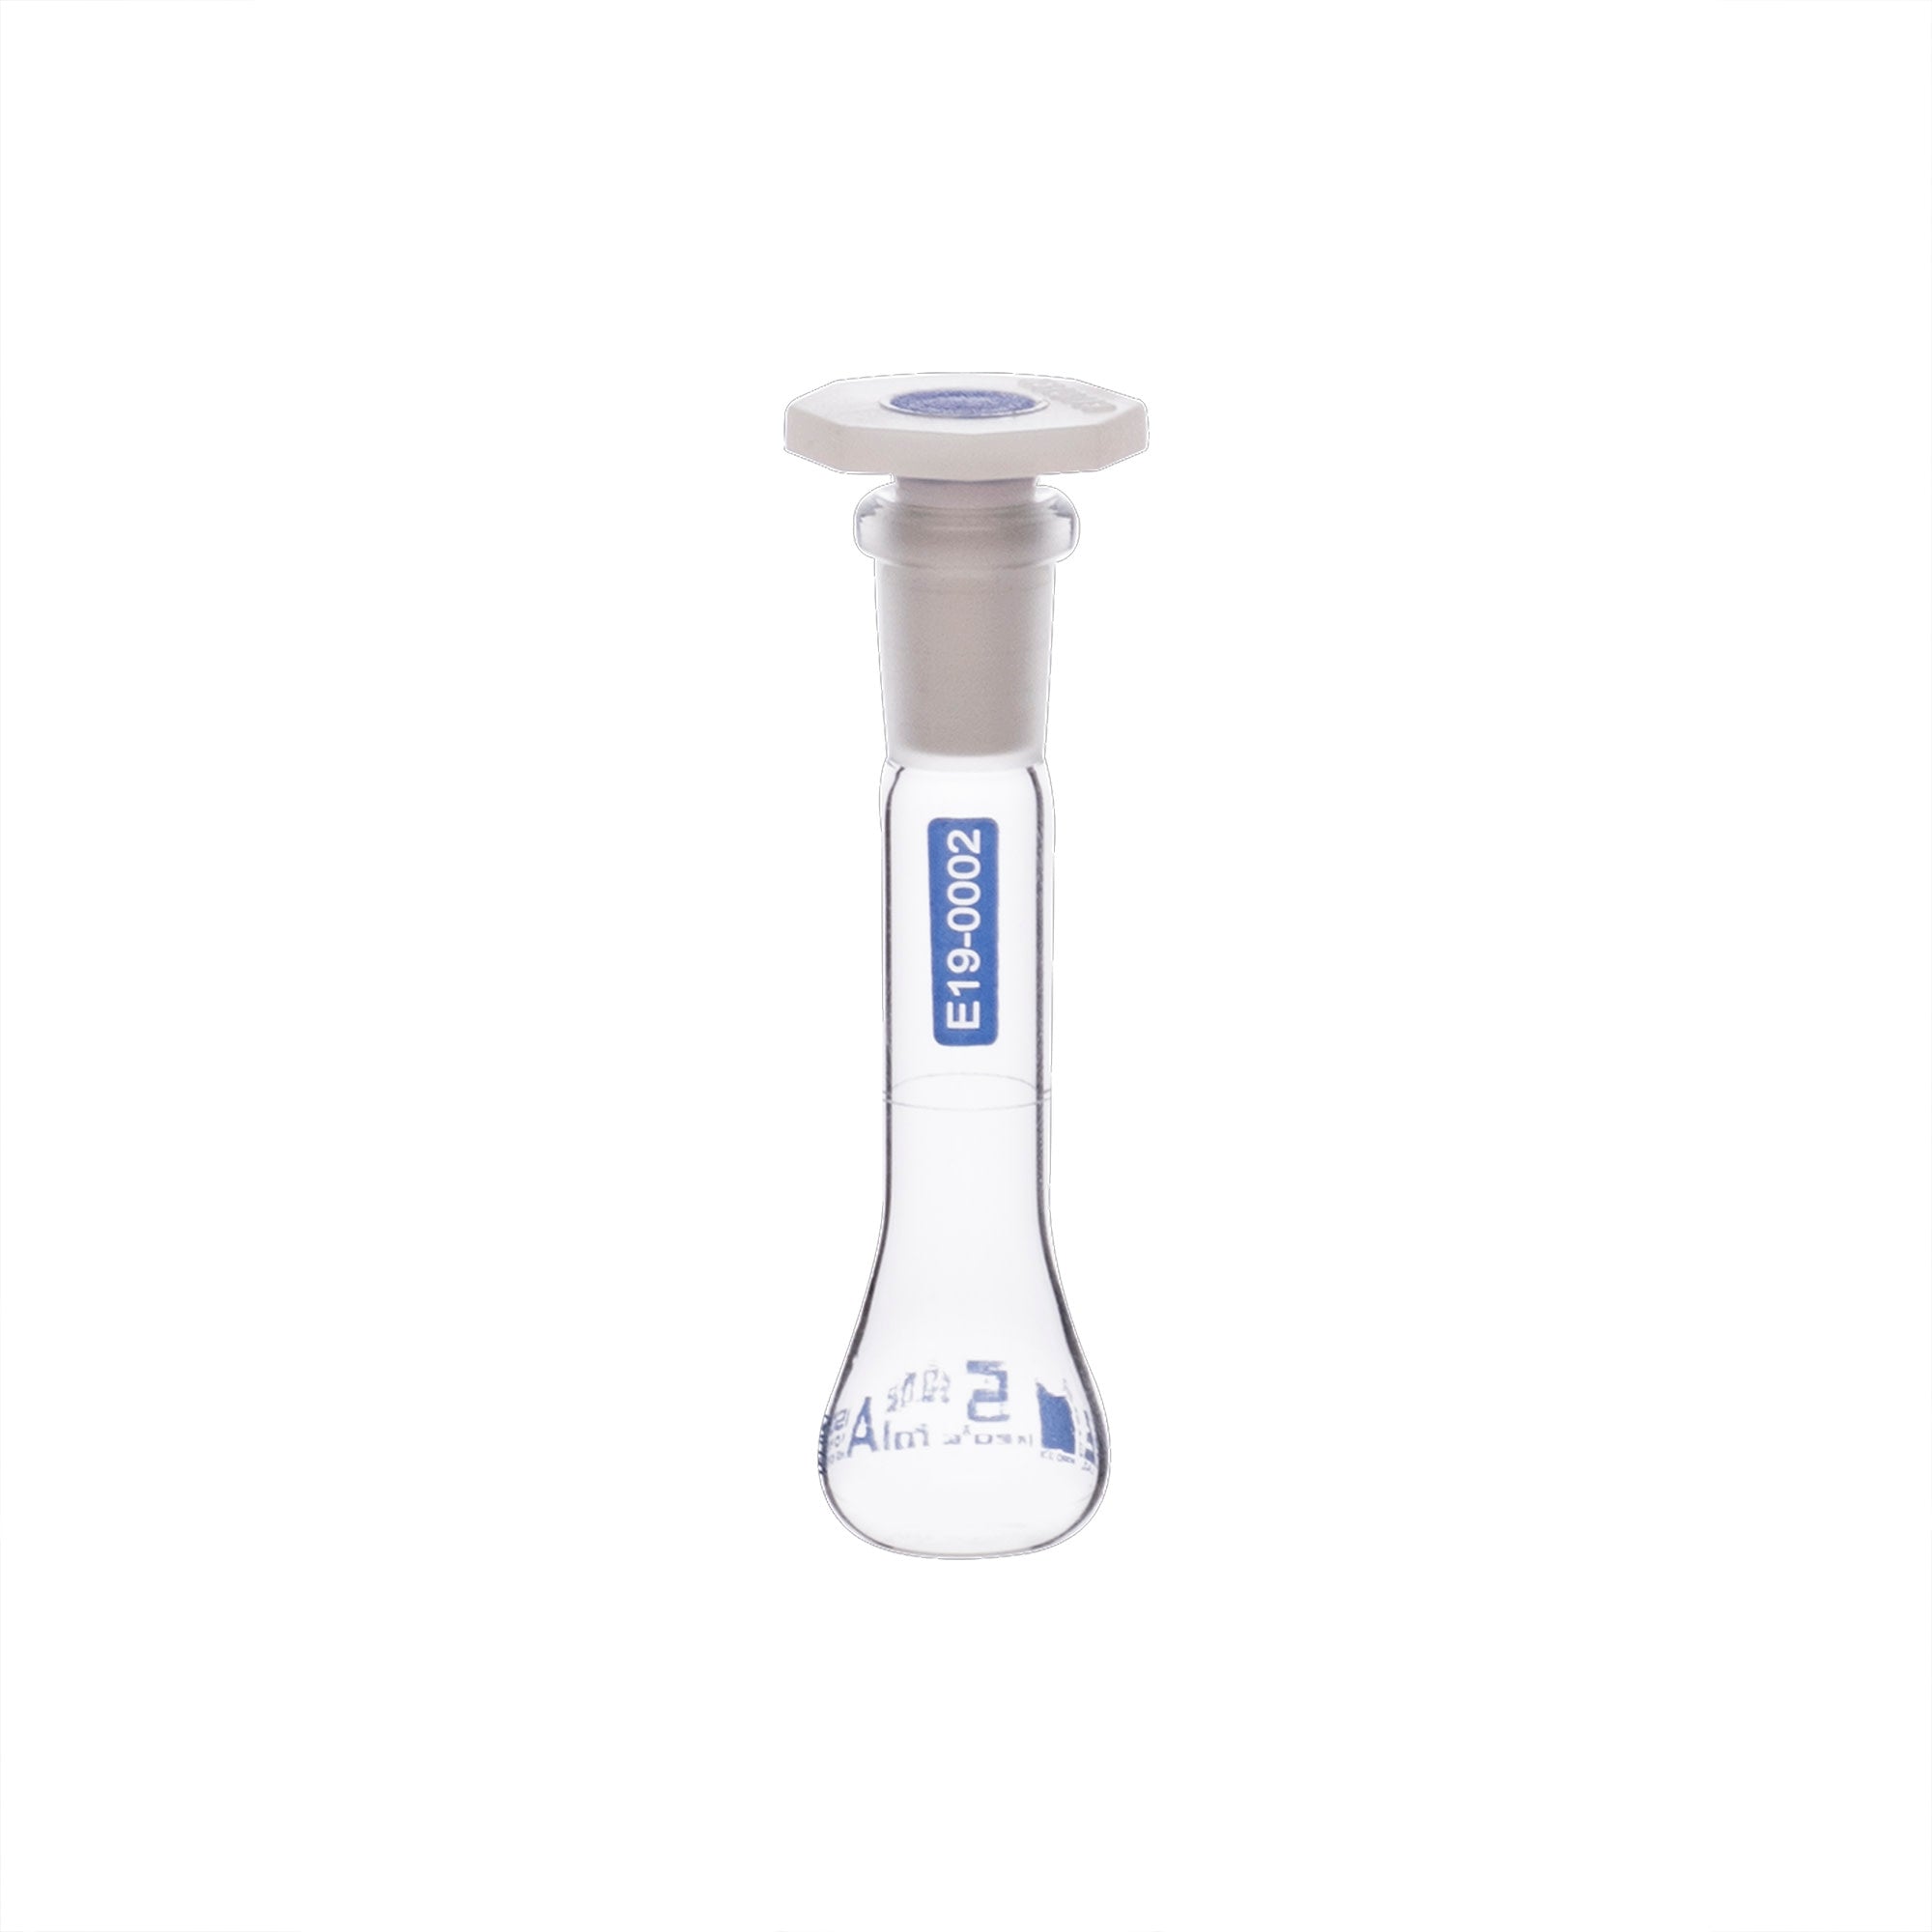 Borosilicate Glass Volumetric Flask with Solid Glass Stopper, 5 ml, USP Class A with Individual Work Certificate,  Pack of 2, Autoclavable